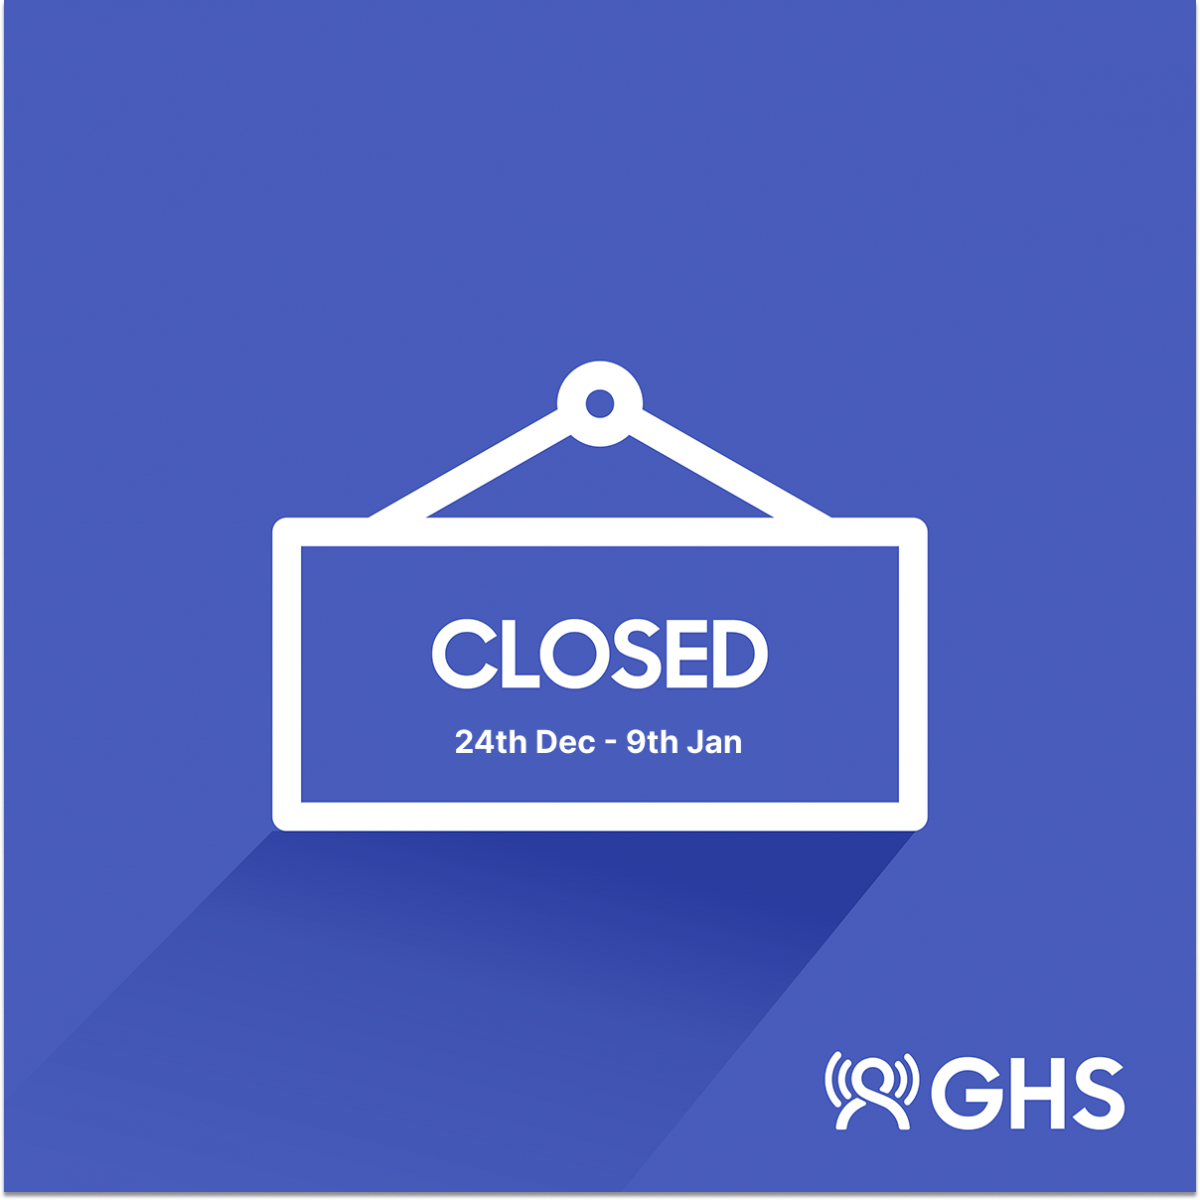 GHS closed image